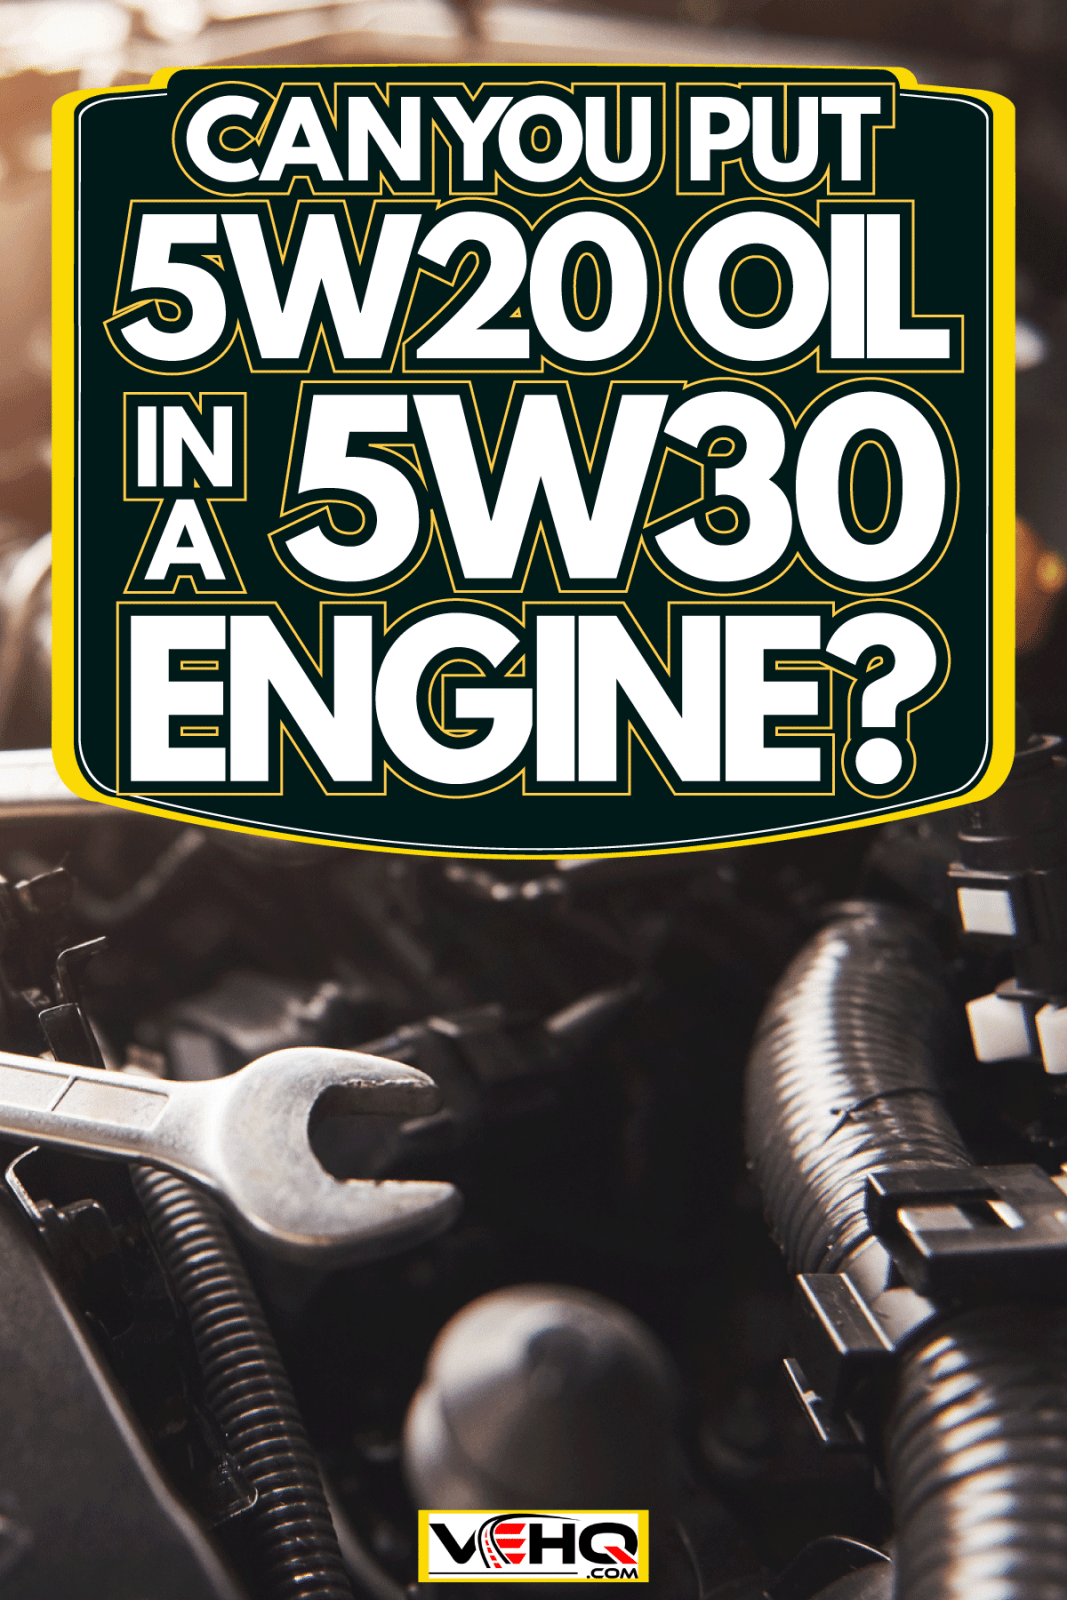 Mechanic hand checking and fixing a broken car in car service, Can You Put 5W20 Oil In A 5W30 Engine?